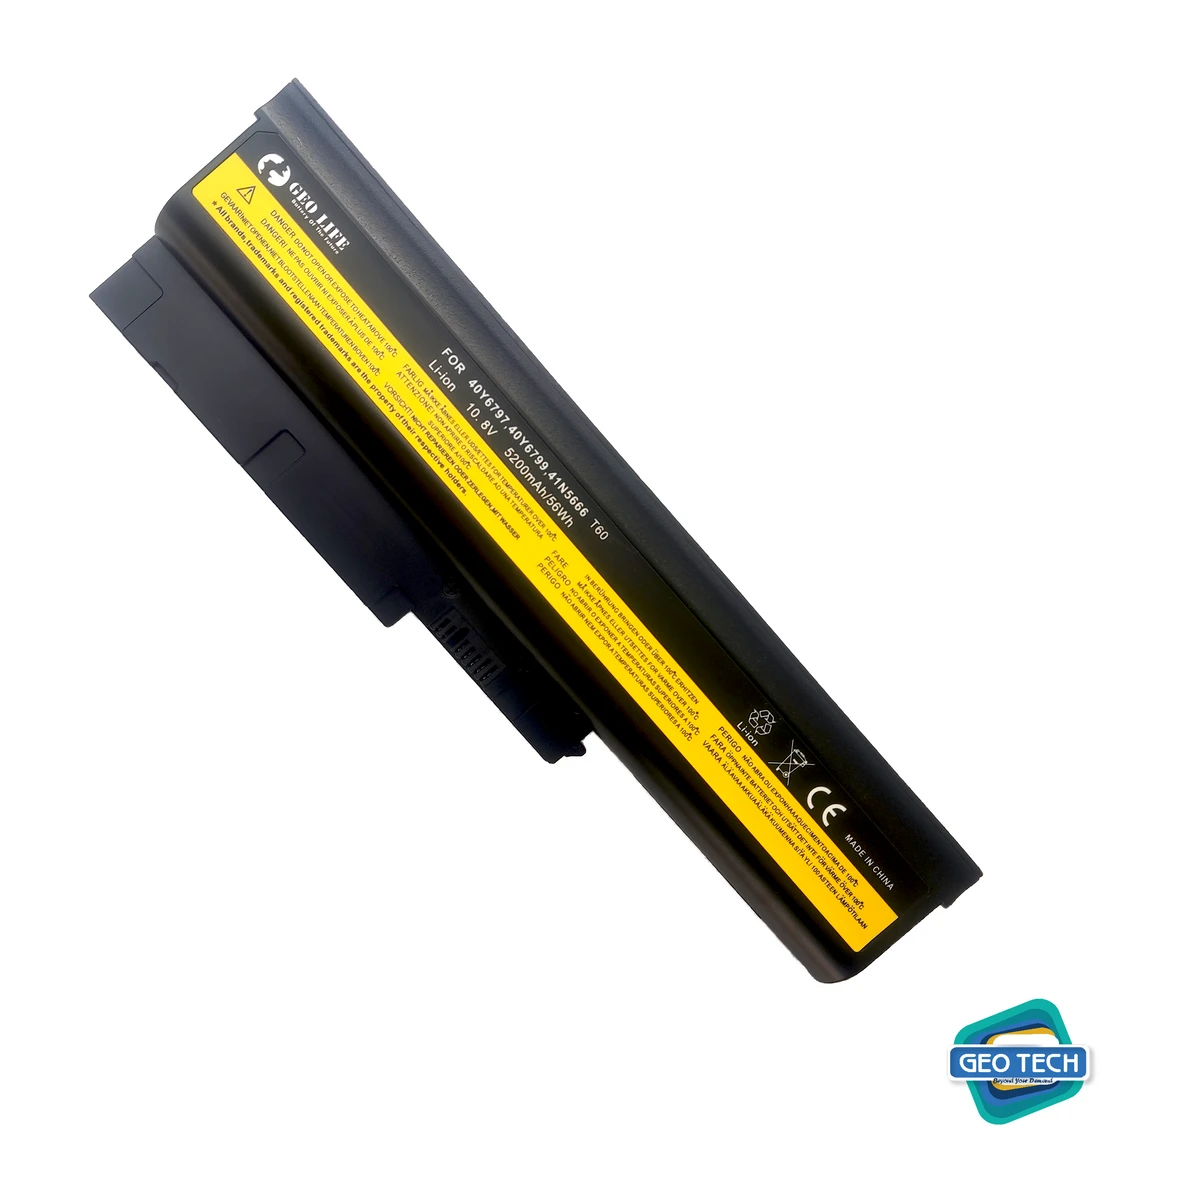 New replacement Laptop Battery for T60 T60p T61 T61p R61i R61e R61 R60e R60 R500 T500 W500 SL500 SL400 SL300 92p1142 92P1141 92P1139 92P1137 92P1133 92P1132 43r9250 42t5246 42t4620 42t4511 40Y6799 40Y